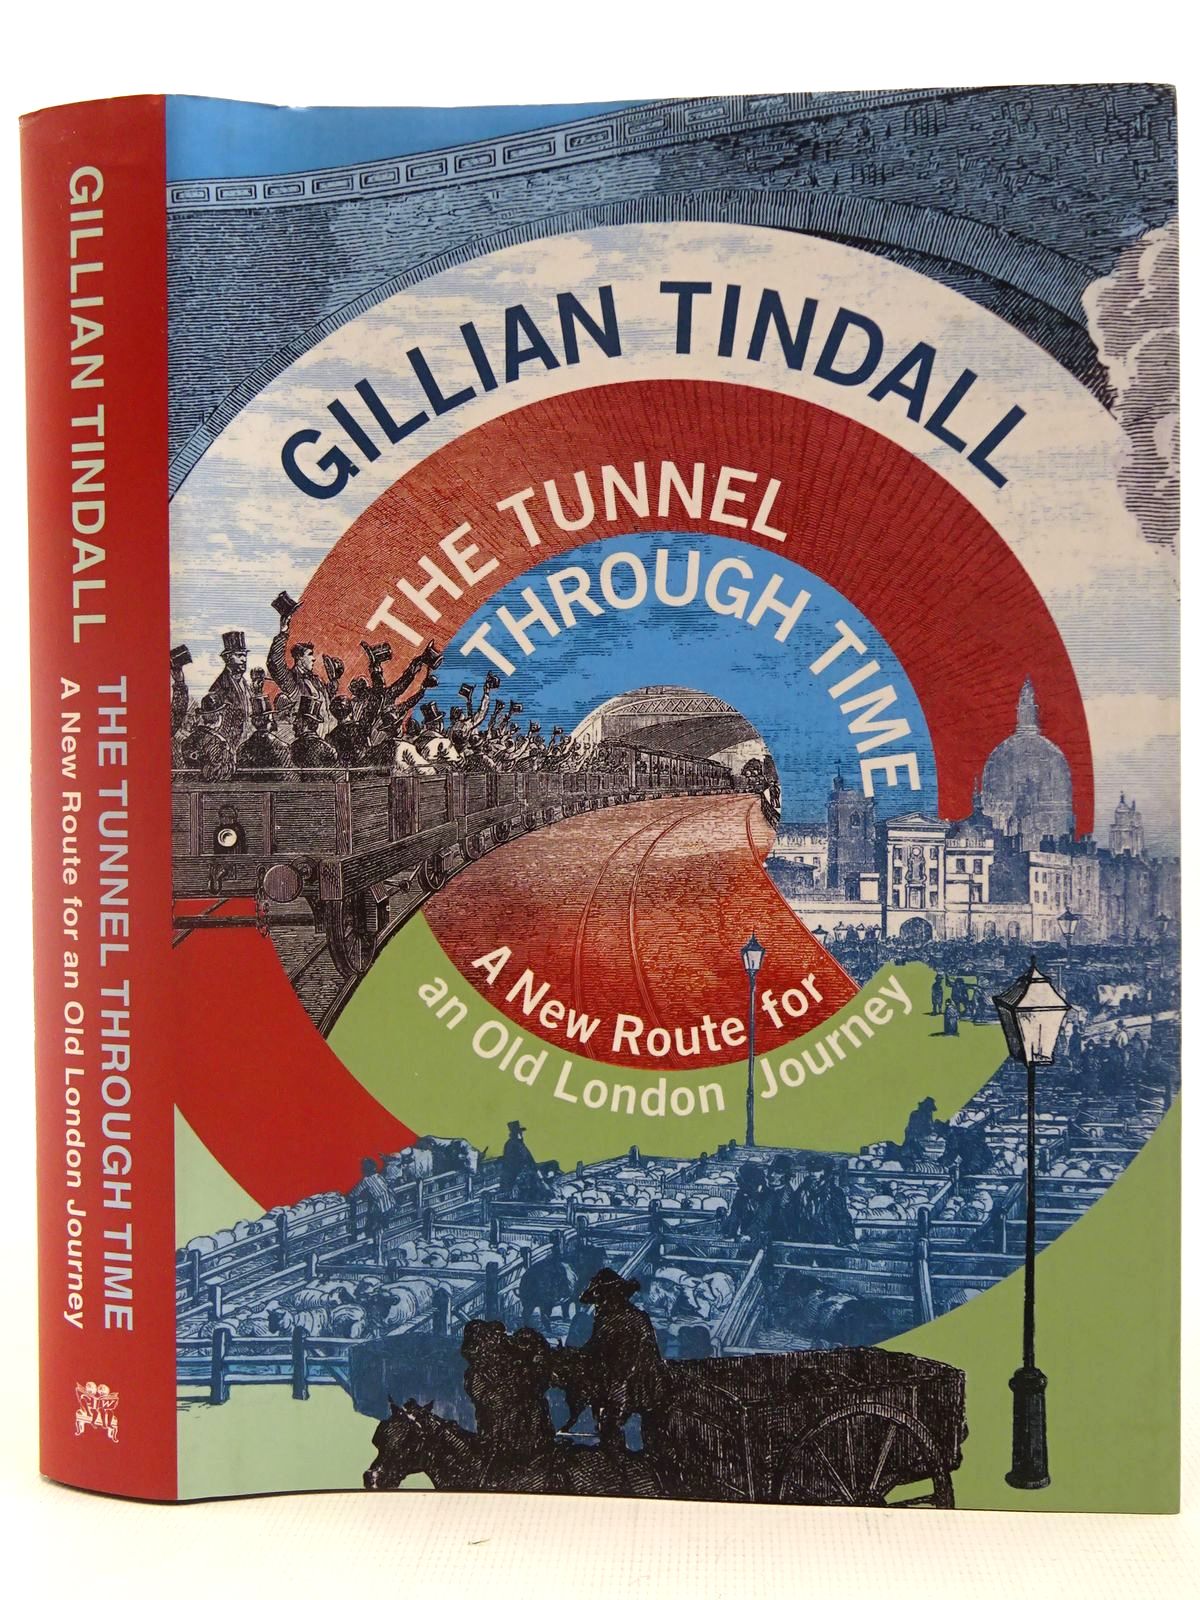 TINDALL, GILLIAN - The Tunnel Through Time a New Route for an Old London Journey